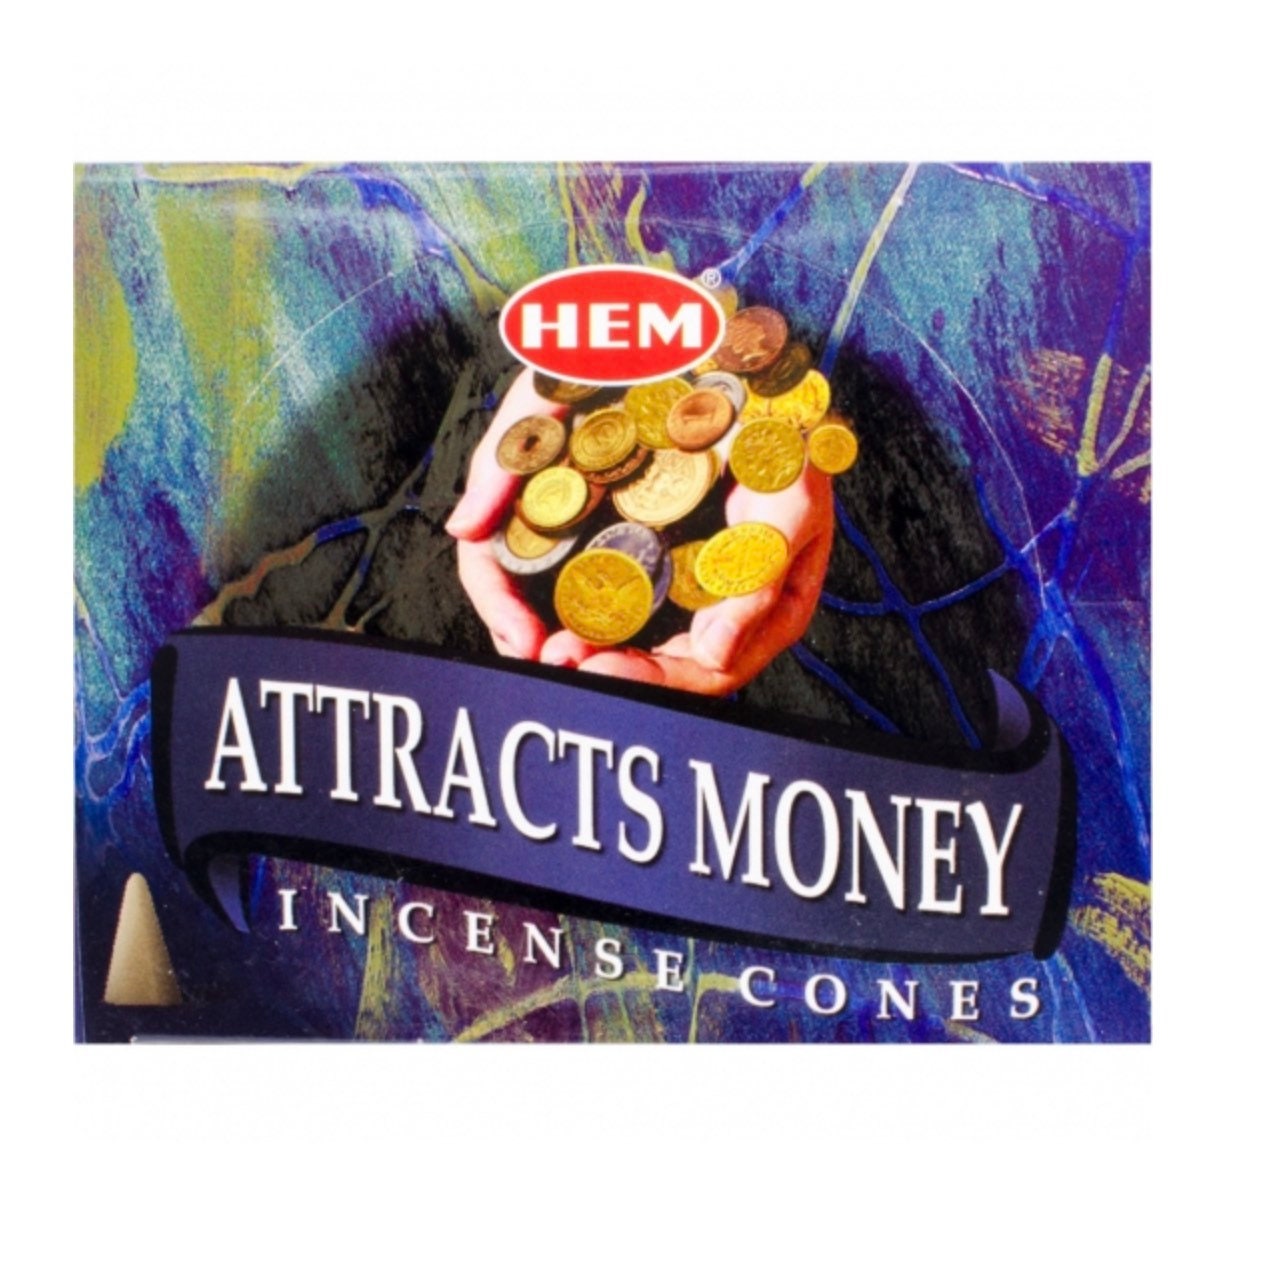 Hem Incense Cones 2 Boxes of 10 cones Attracts Money Awesomely fragrant!  total 20 cones